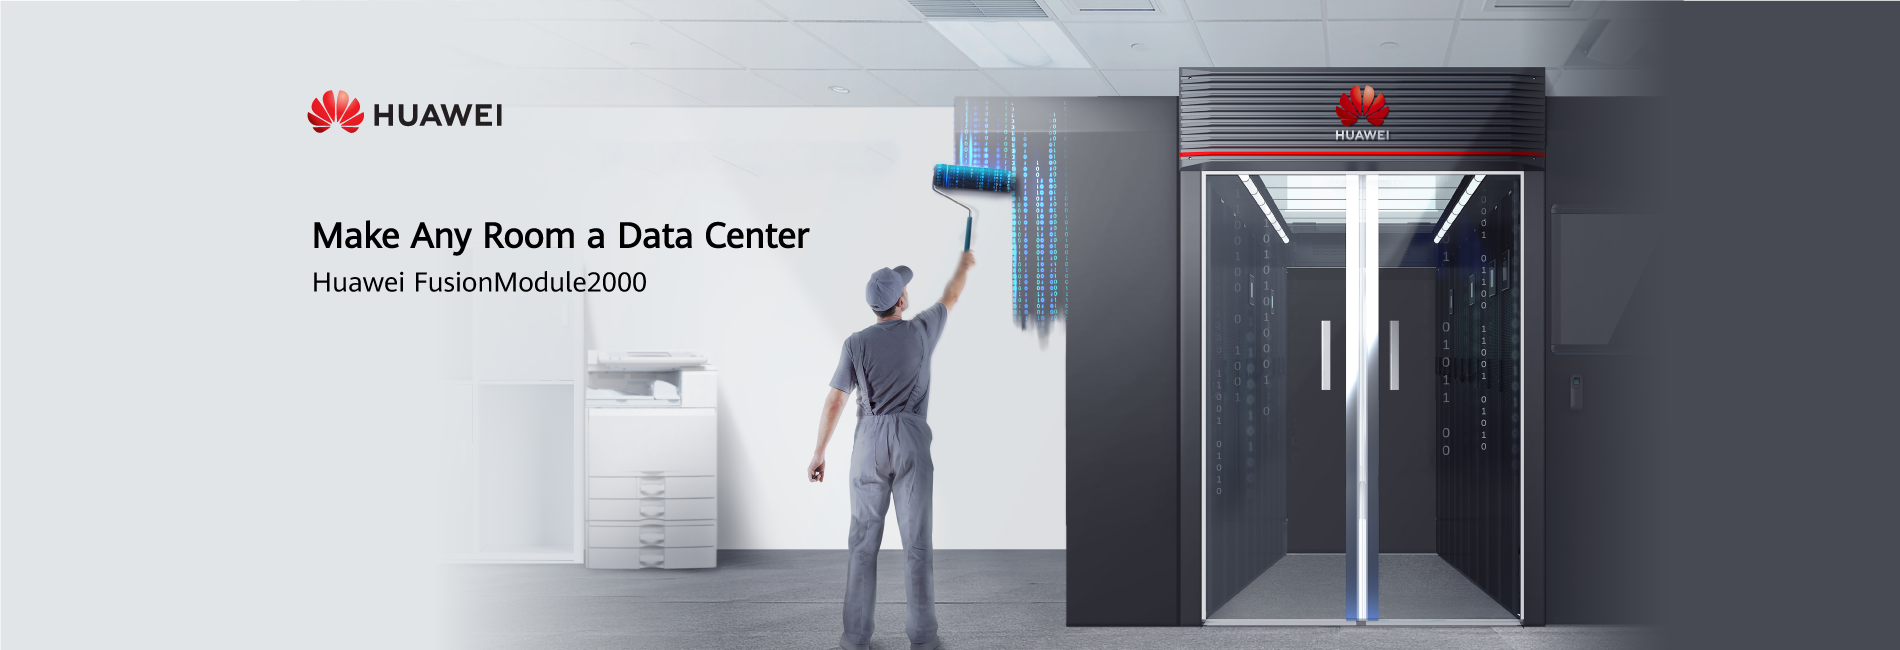 Huawei Make Any Room a Data Center